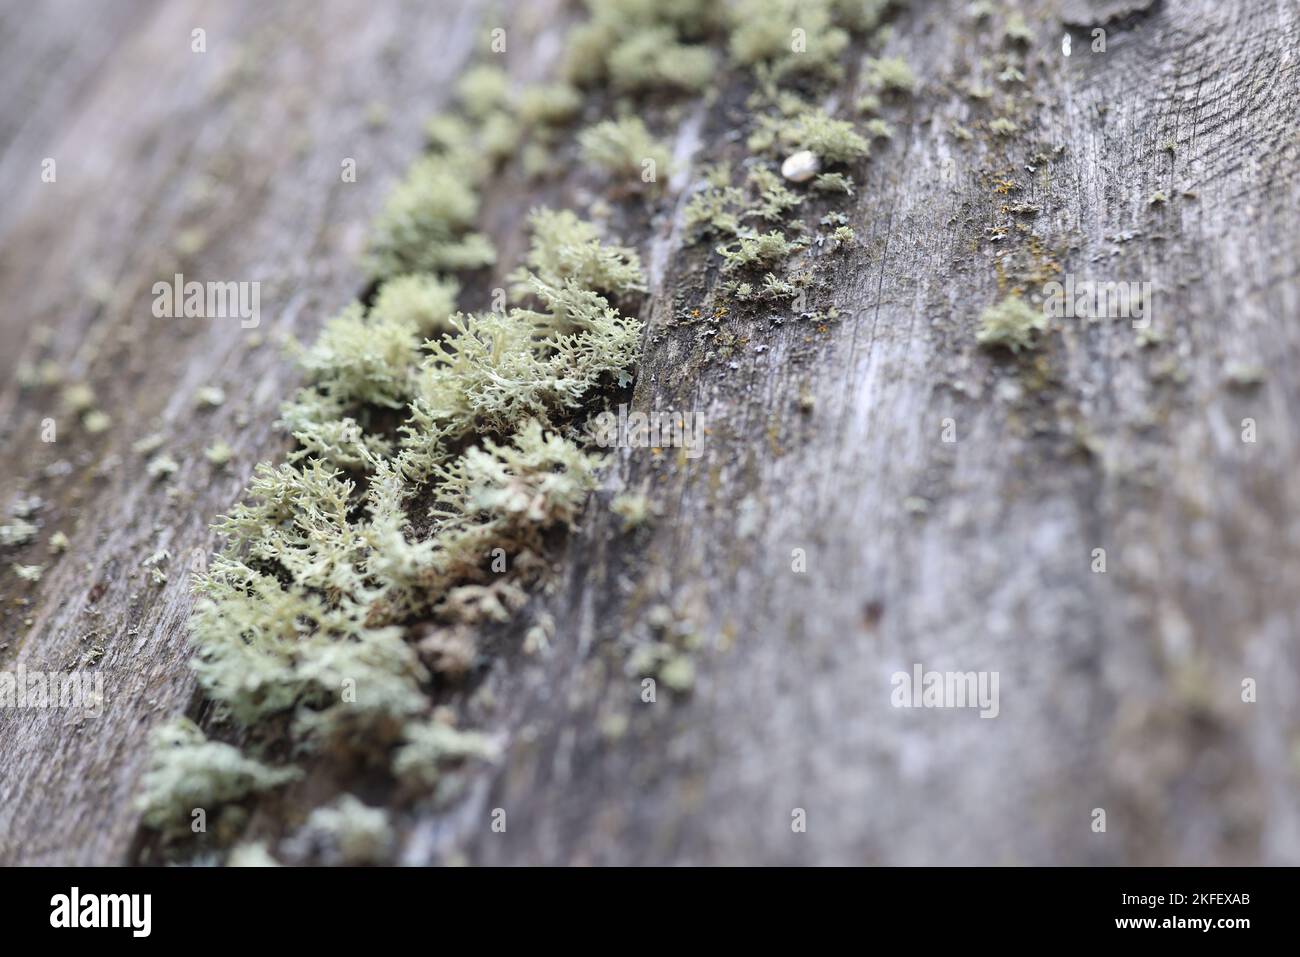 Textured wood surface with lichens colony. Stock Photo